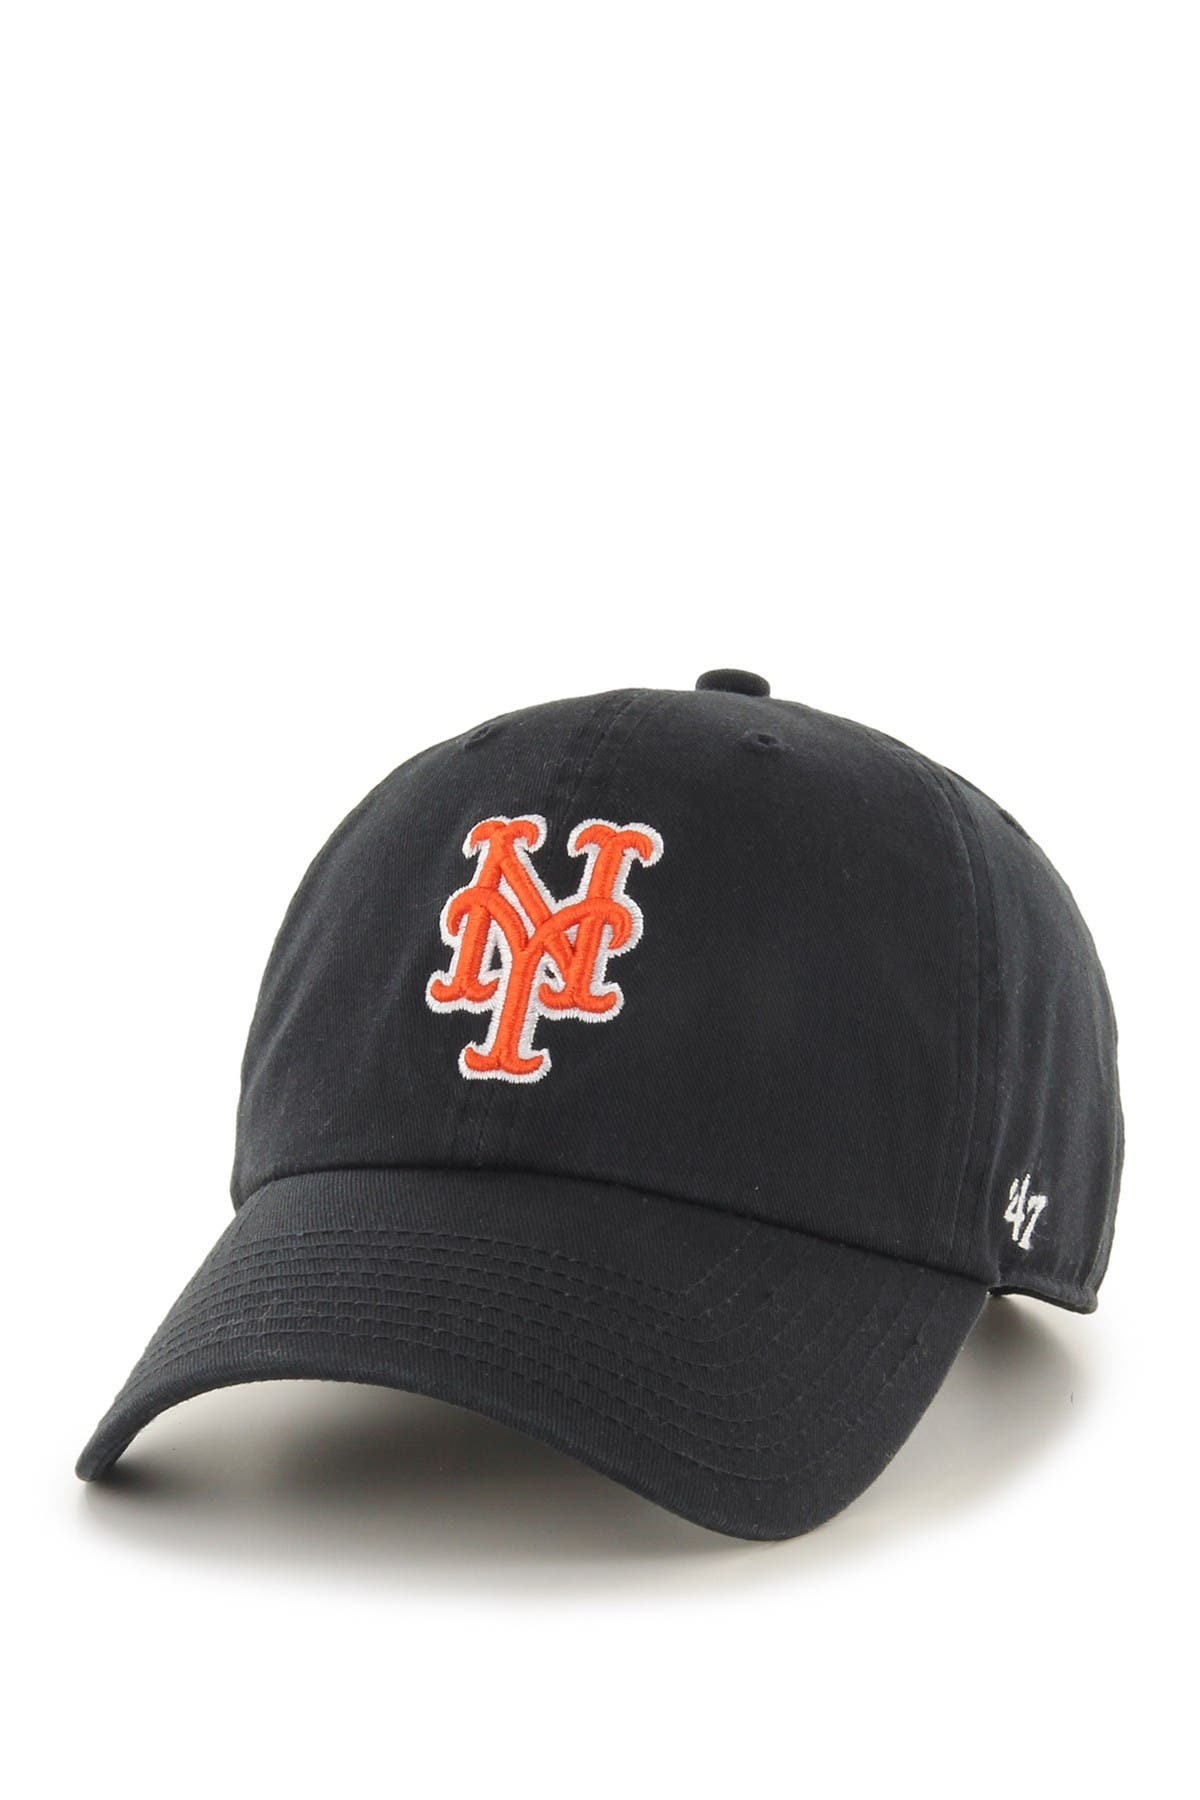 CLEAN UP New York Mets schwarz 47 Brand Relaxed Fit Cap 